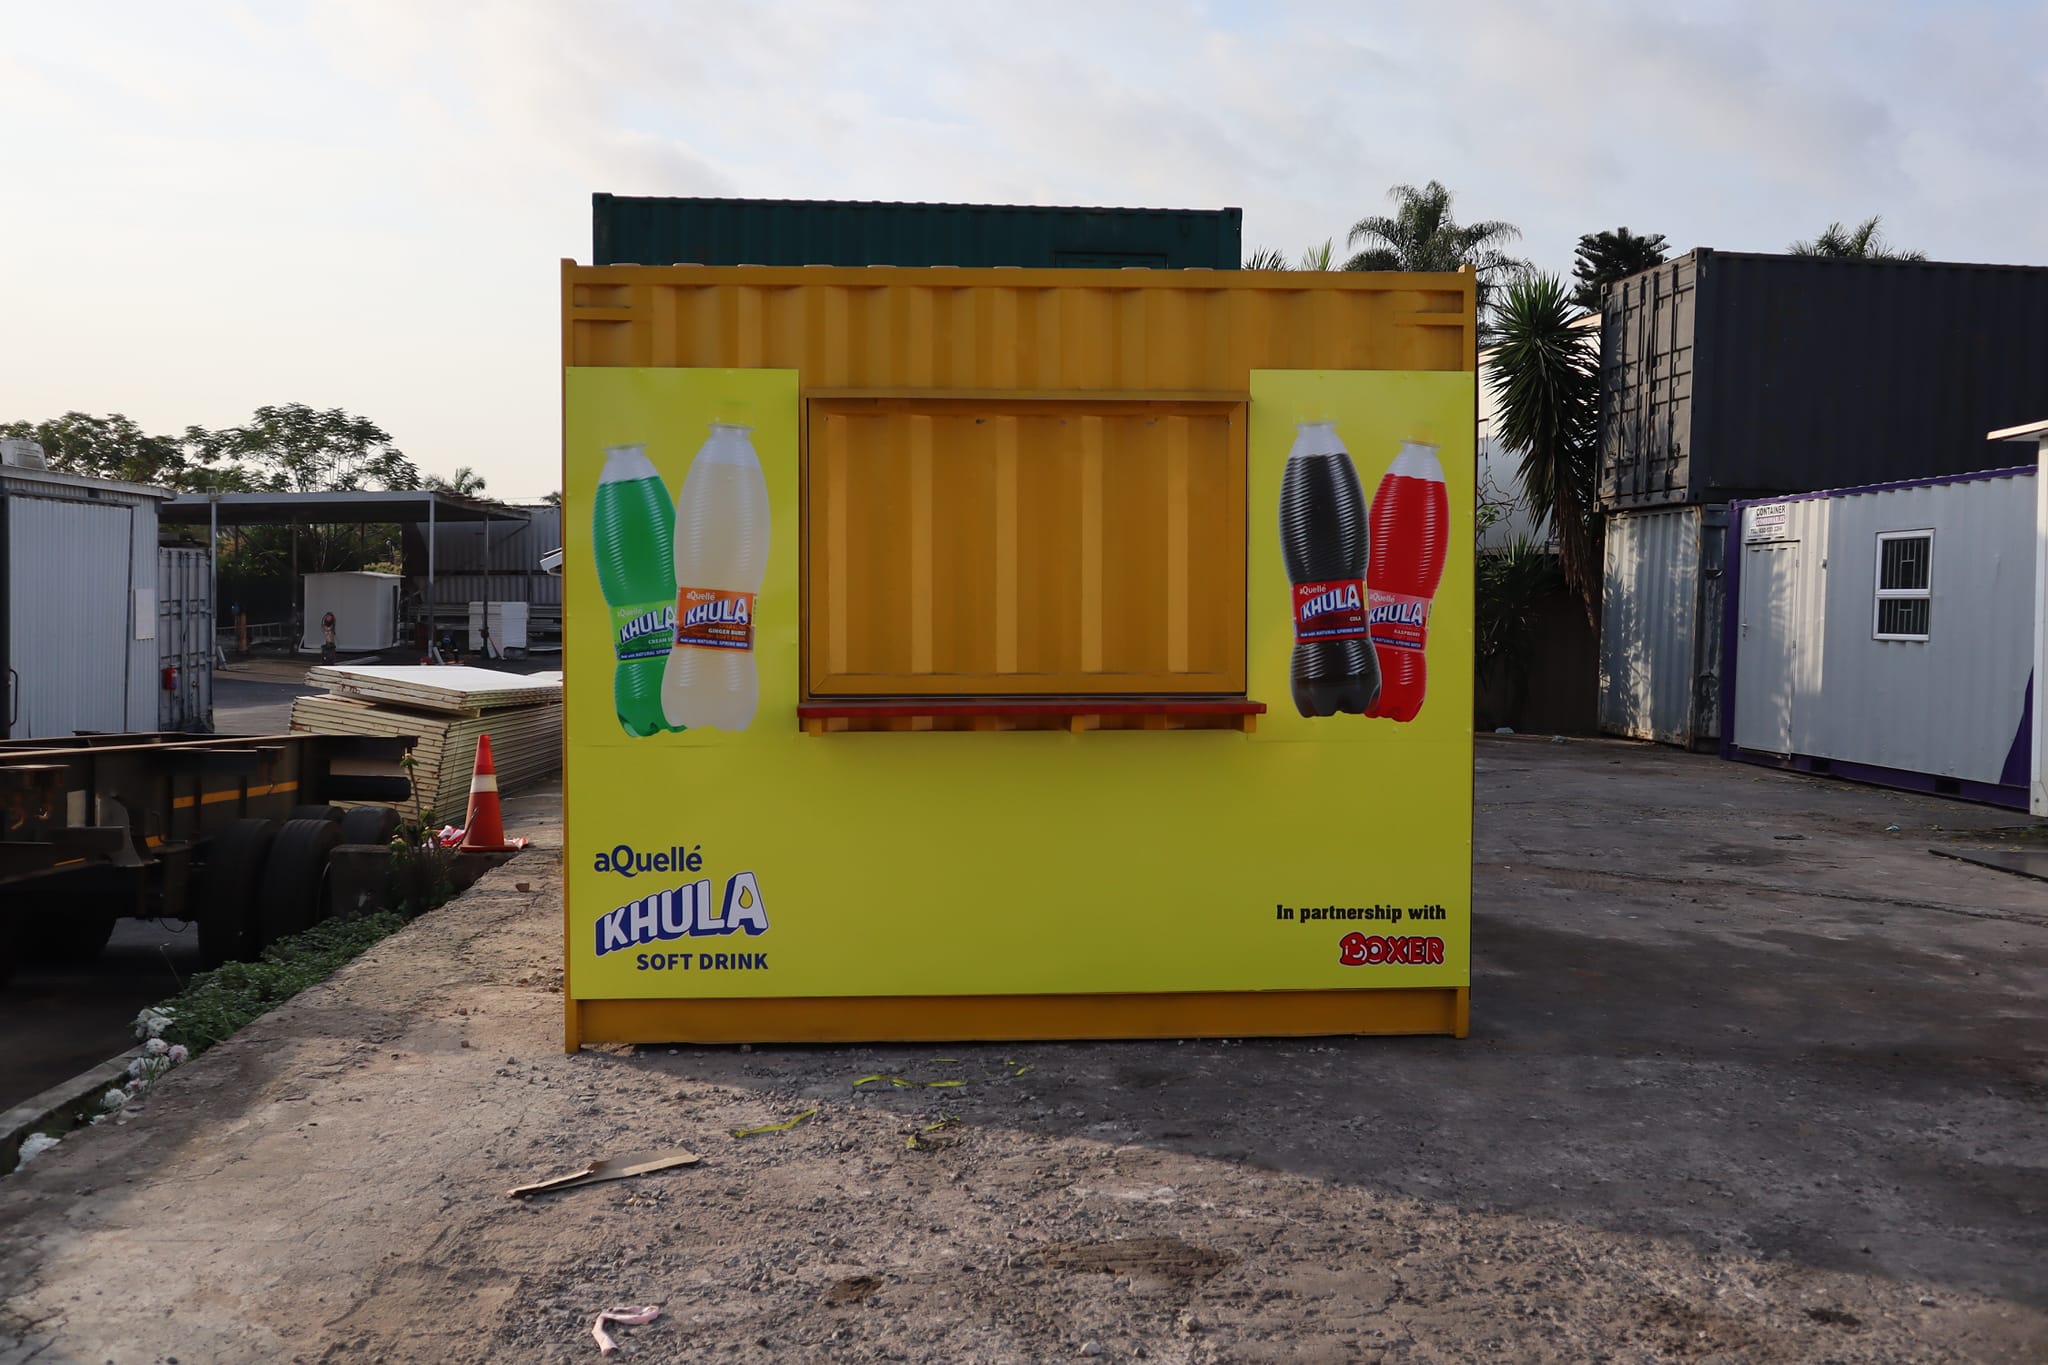 Tuckshop containers for sale